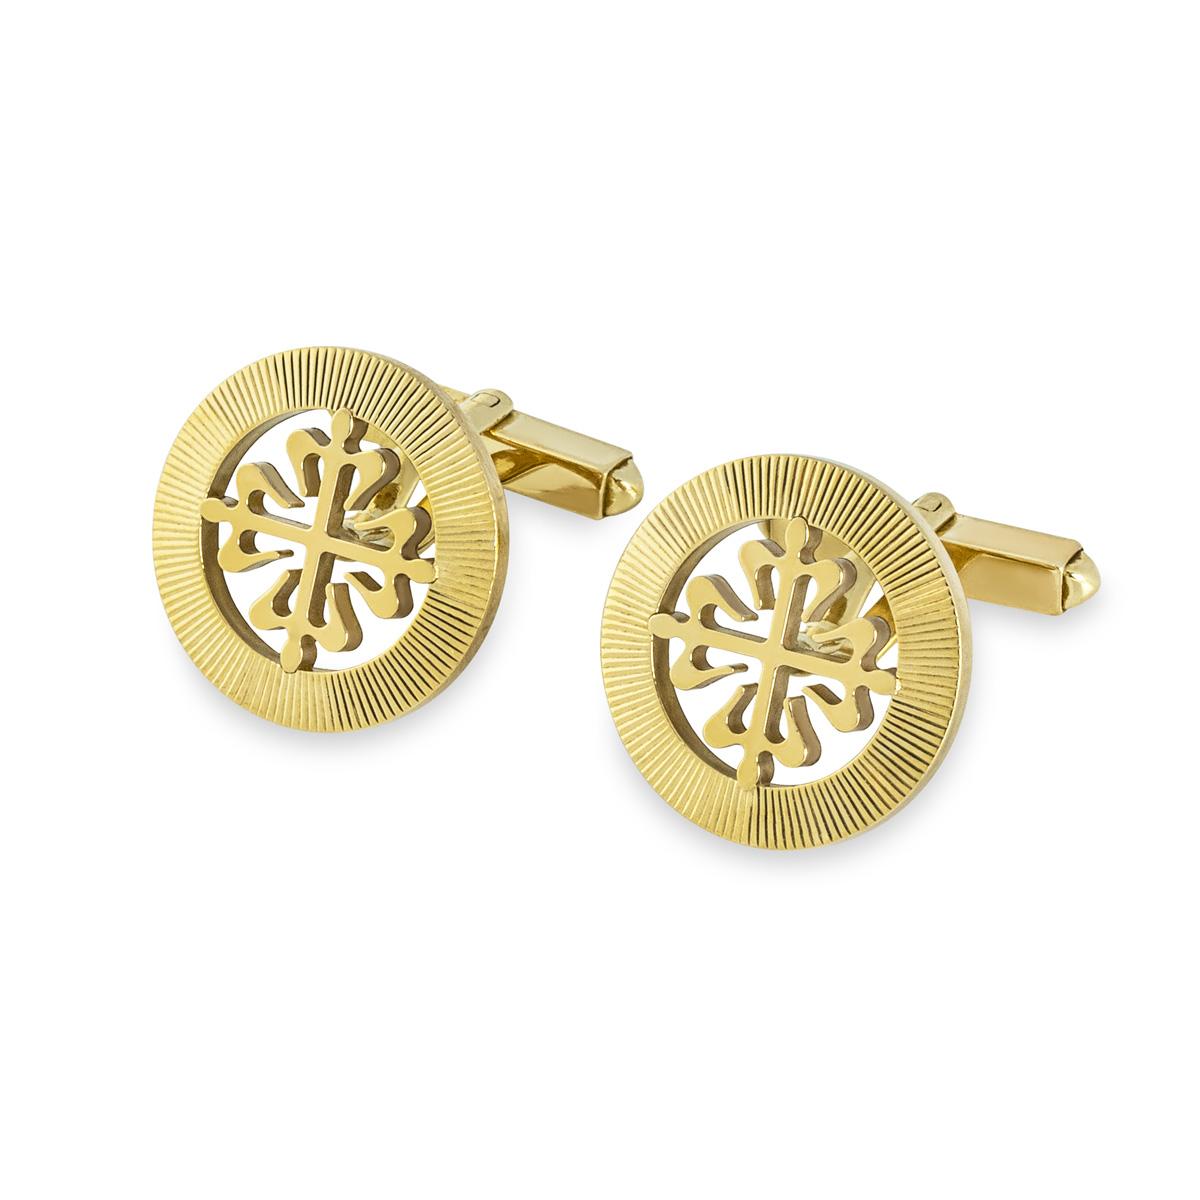 A pair of Calatrava cufflinks in 18ct yellow gold by Patek Philippe. Each cufflink features the classic Calatrava cross motif, surrounded by a guilloched outer ring. Featuring t-bar fittings, the Calatrava motif measures 18mm in diameter. The